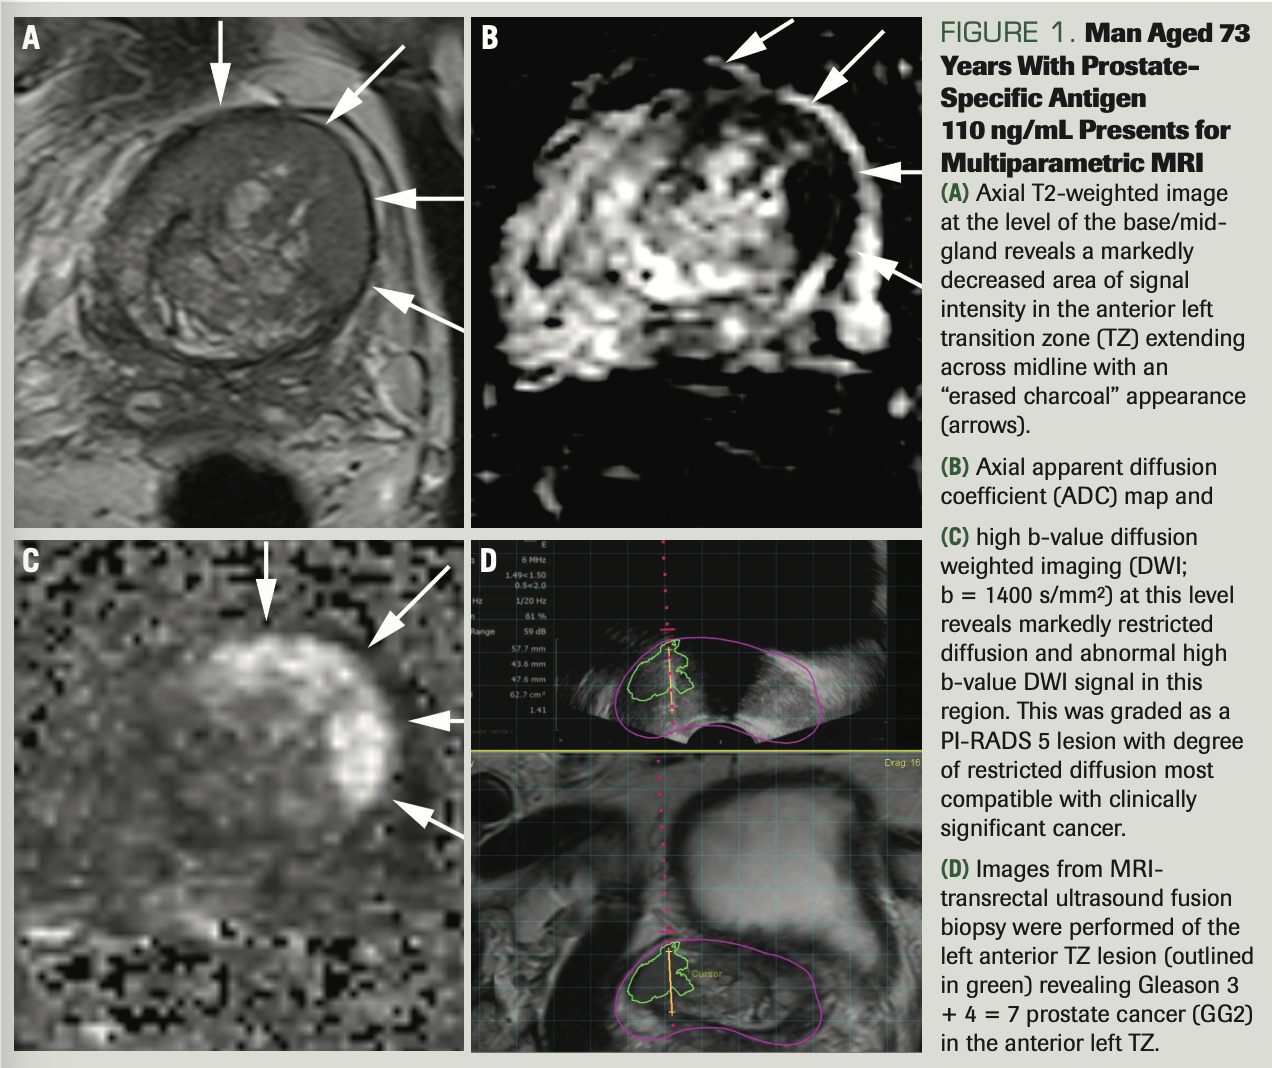 FIGURE 1. Man Aged 73 Years With Prostate- Specific Antigen
110 ng/mL Presents for Multiparametric MRI



(A) Axial T2-weighted image at the level of the base/mid- gland reveals a markedly decreased area of signal intensity in the anterior left transition zone (TZ) extending across midline with an “erased charcoal” appearance (arrows).



(B) Axial apparent diffusion coefficient (ADC) map and



(C) high b-value diffusion weighted imaging (DWI;
b = 1400 s/mm2) at this level reveals markedly restricted diffusion and abnormal high b-value DWI signal in this region. This was graded as a PI-RADS 5 lesion with degree of restricted diffusion most compatible with clinically significant cancer.



(D) Images from MRI- transrectal ultrasound fusion biopsy were performed of the left anterior TZ lesion (outlined in green) revealing Gleason 3 + 4 = 7 prostate cancer (GG2) in the anterior left TZ.